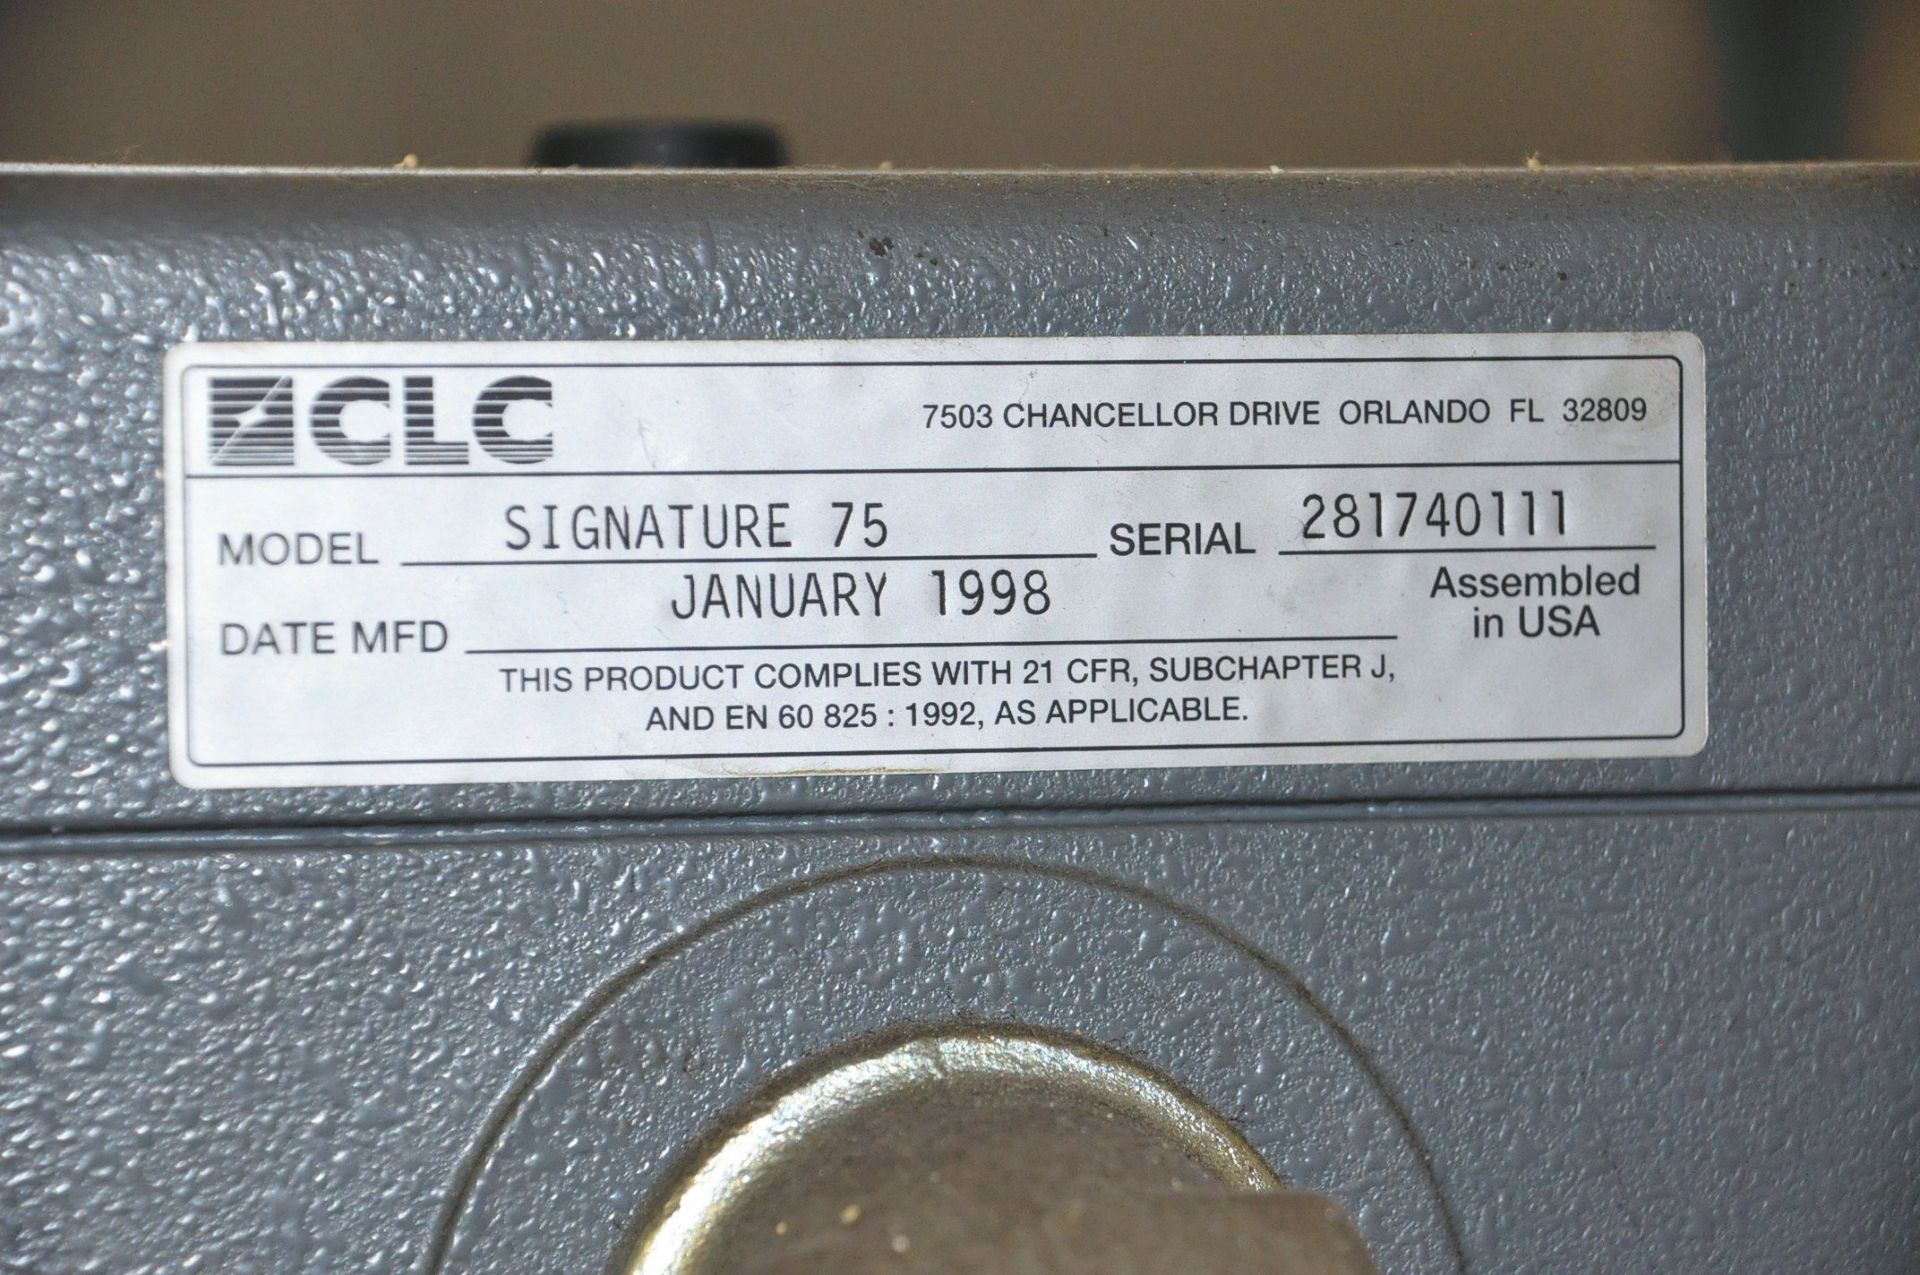 Control Laser Corp CLC Signature 75 Laser Marking System, S/N 281740111, 1998 - Image 5 of 5